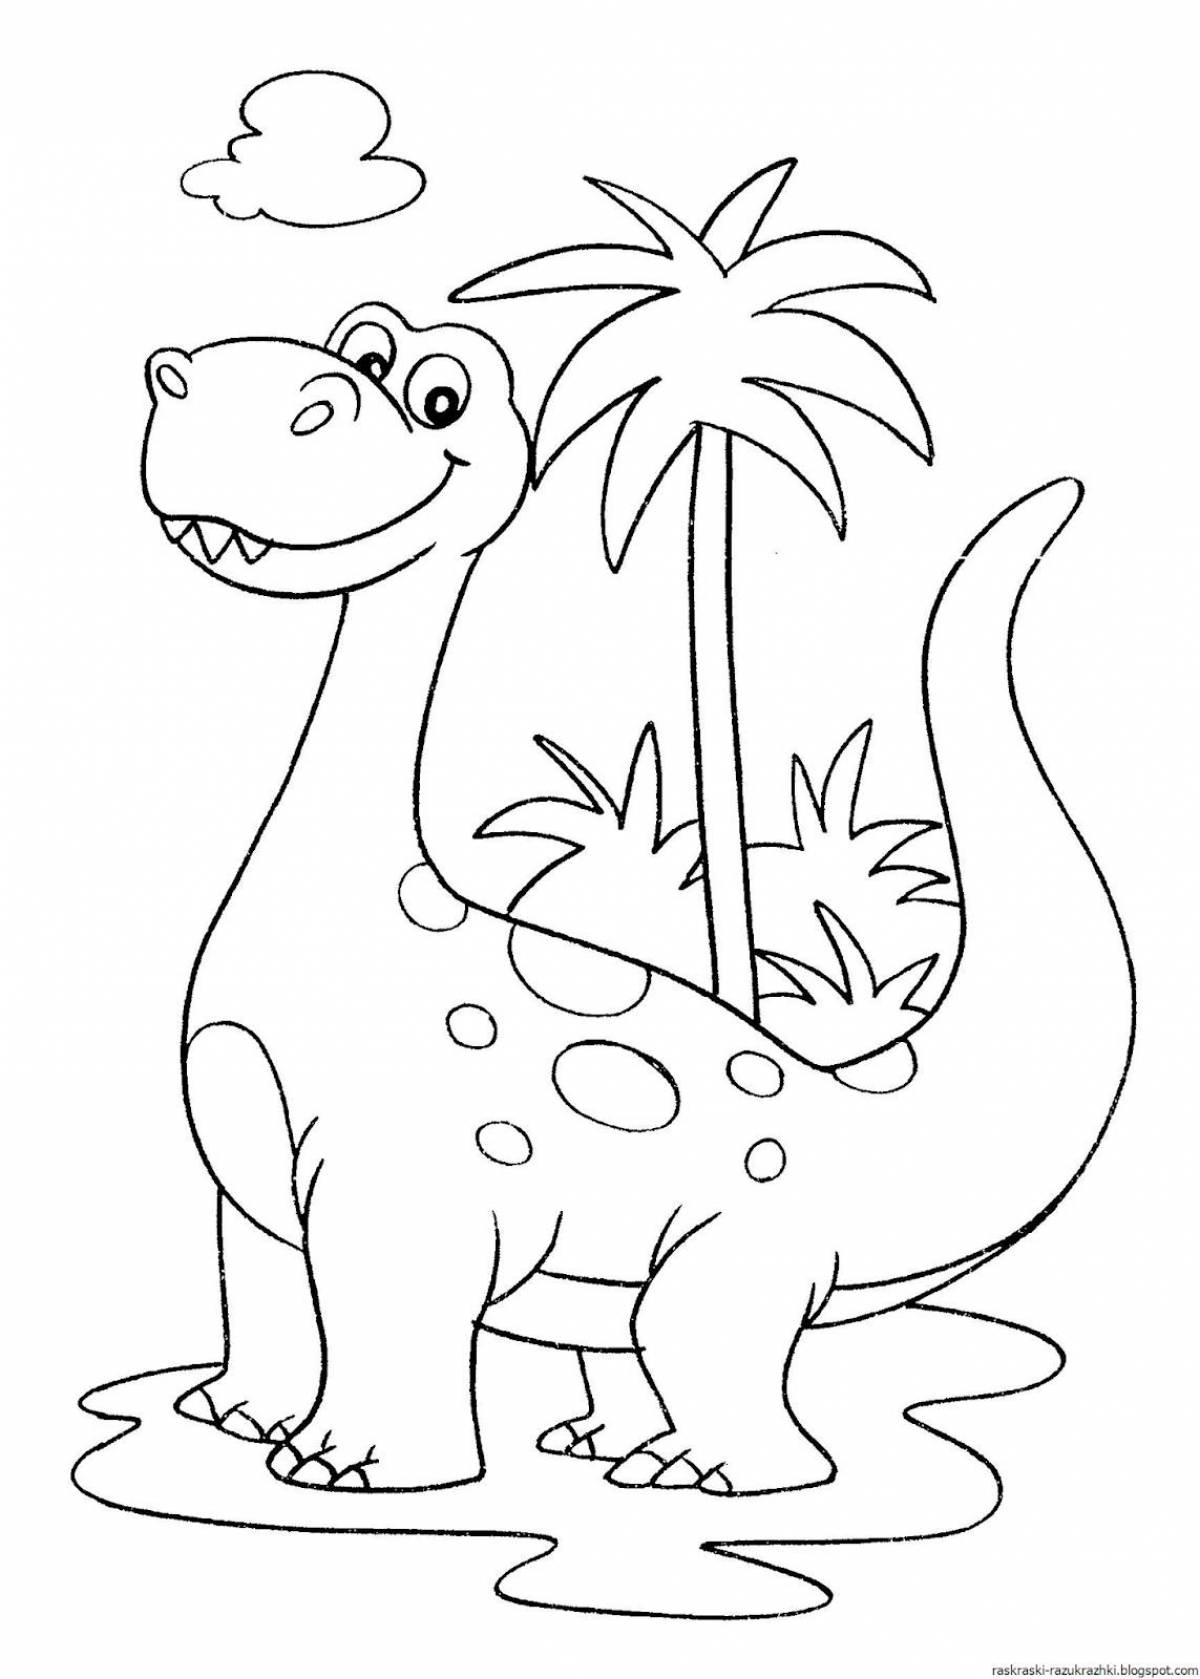 Dinosaur coloring book for 3-4 year olds